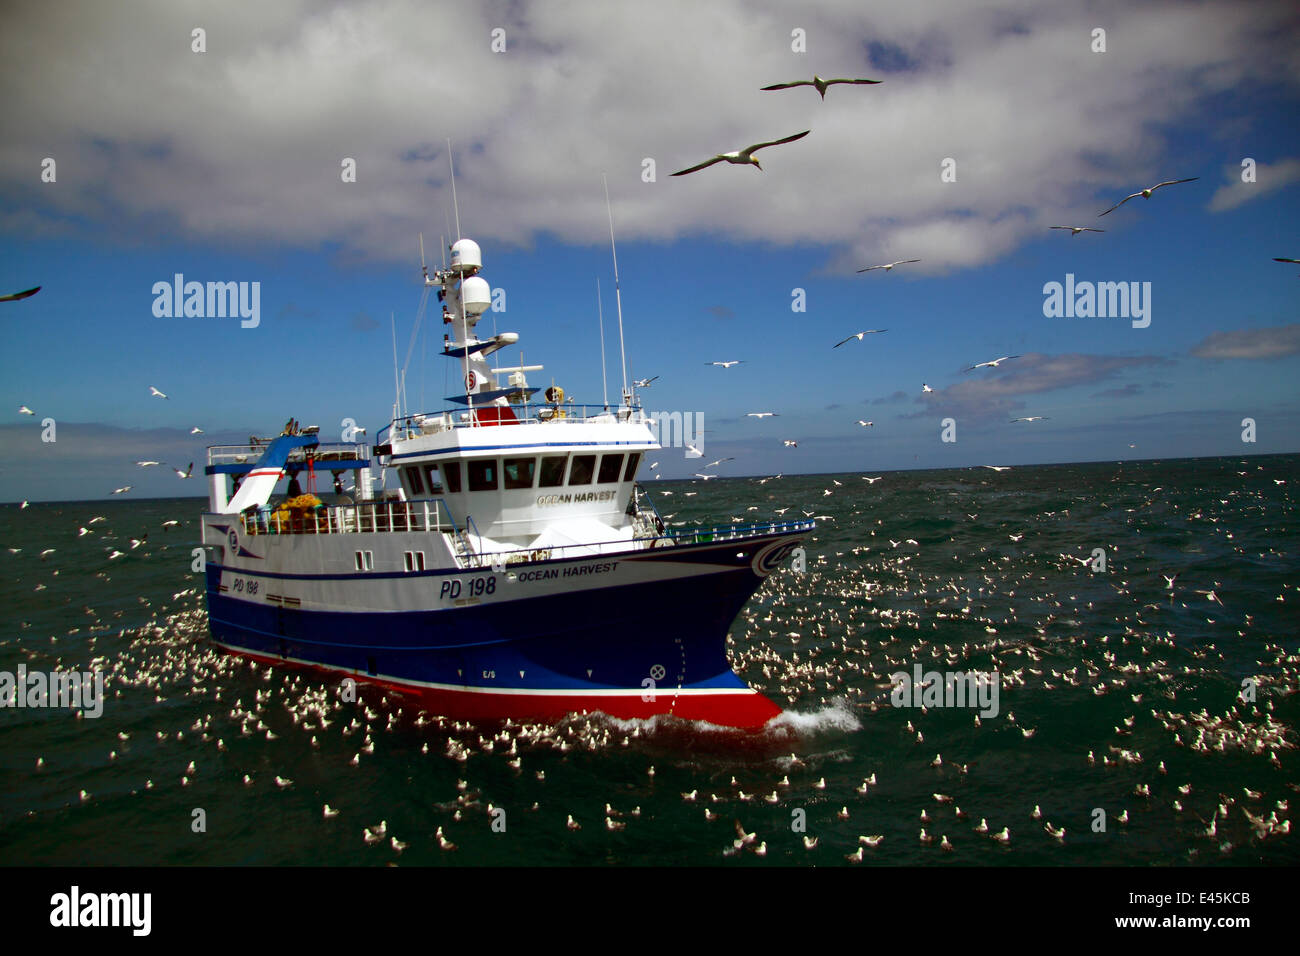 Ocean Harvest  fishing on the North Sea surrounded by sea birds. June 2010. Property released. Stock Photo